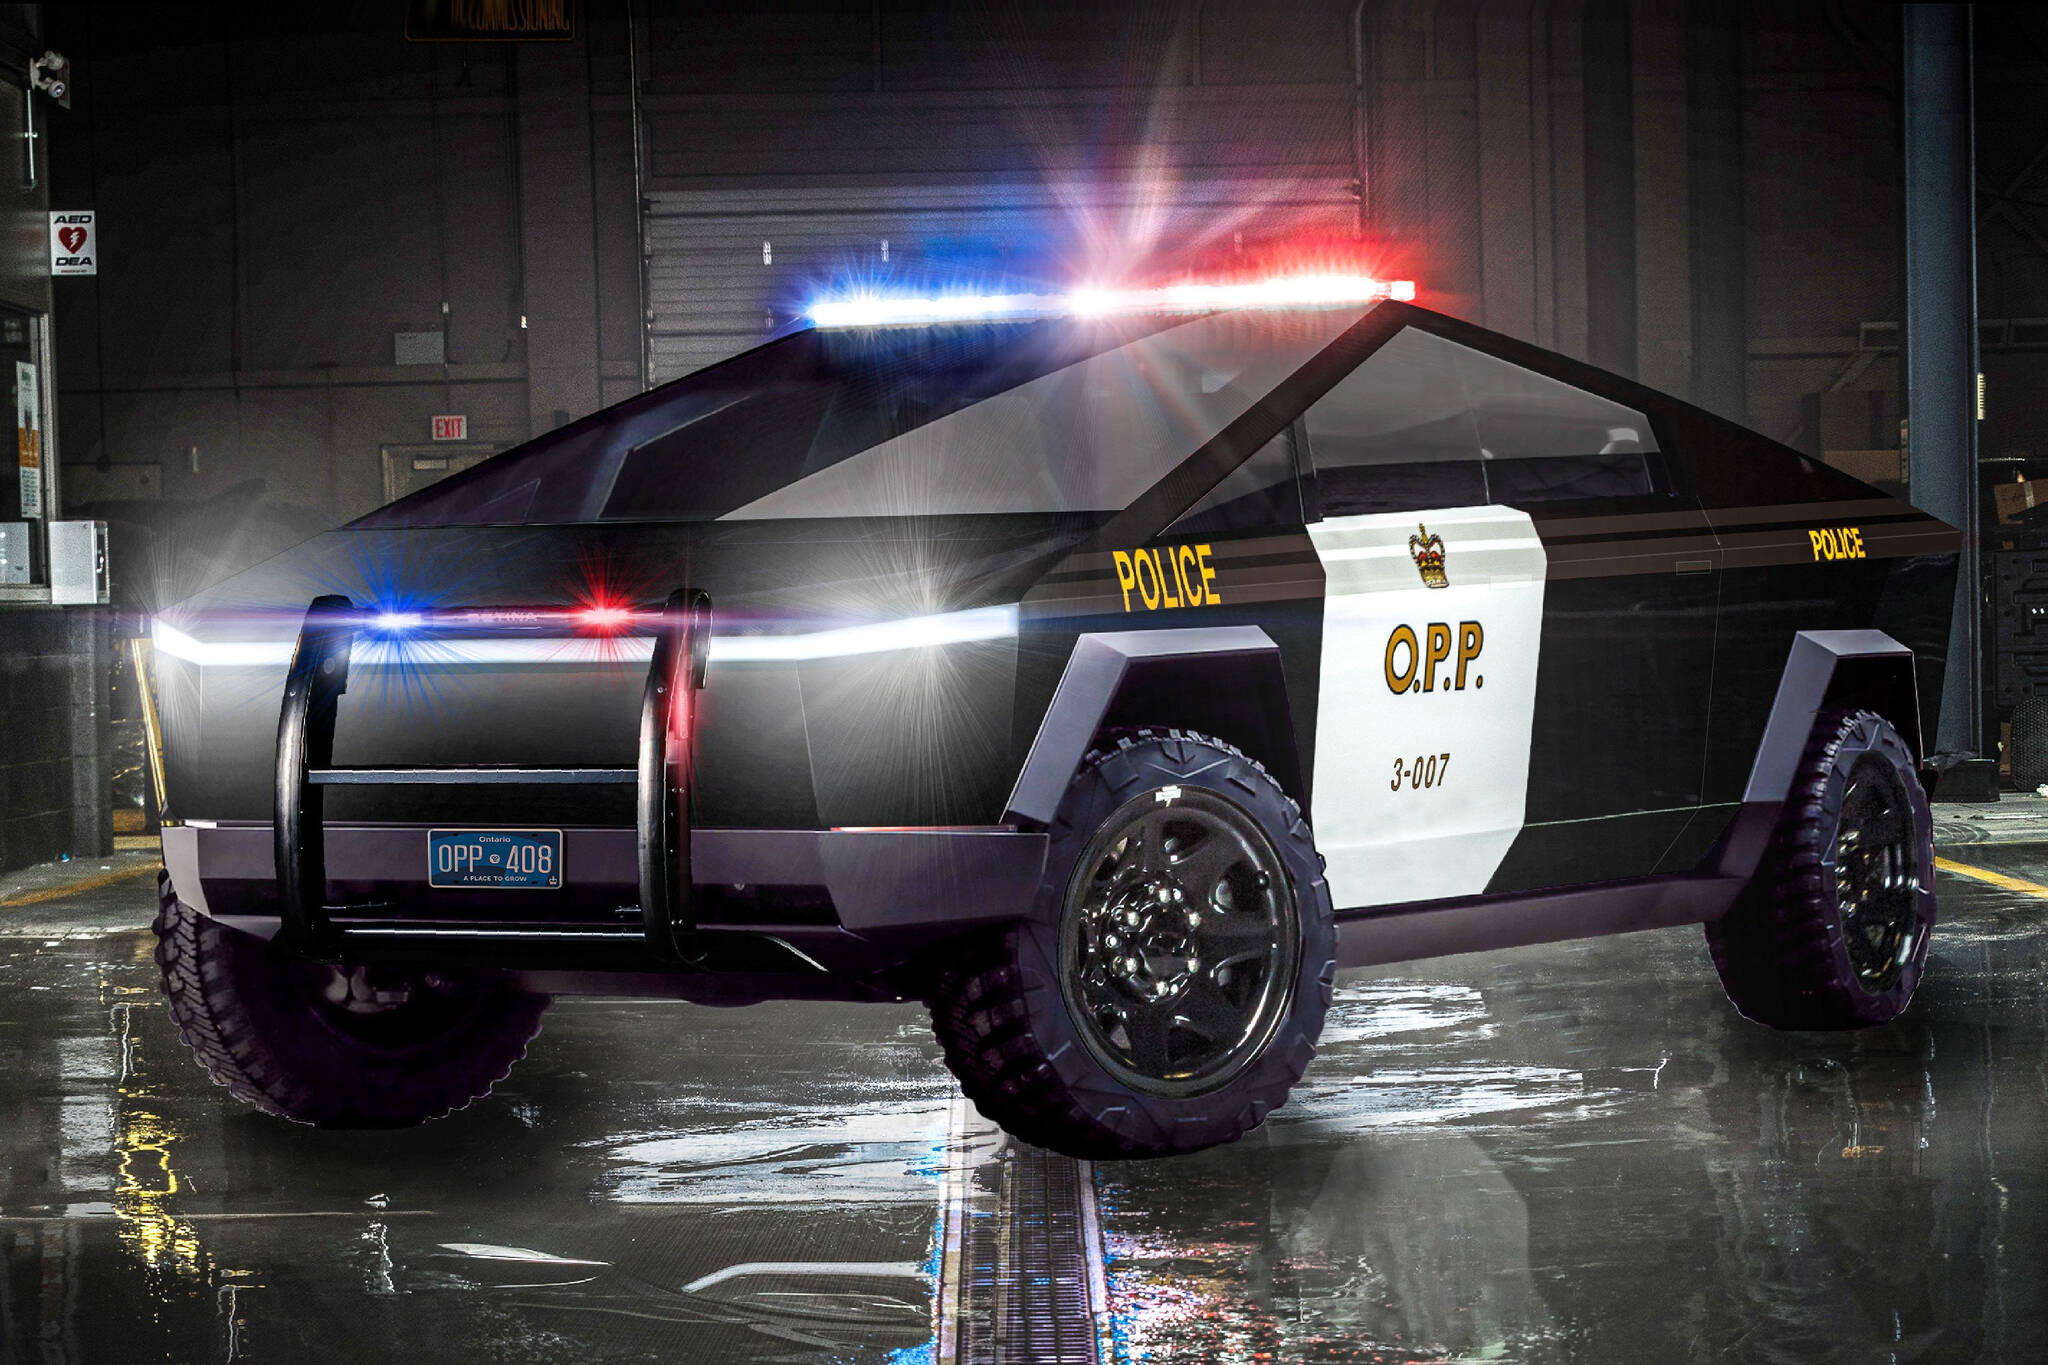 Download The Opp Are Interested In The Idea Of A Tesla Cybertruck Police Vehicle